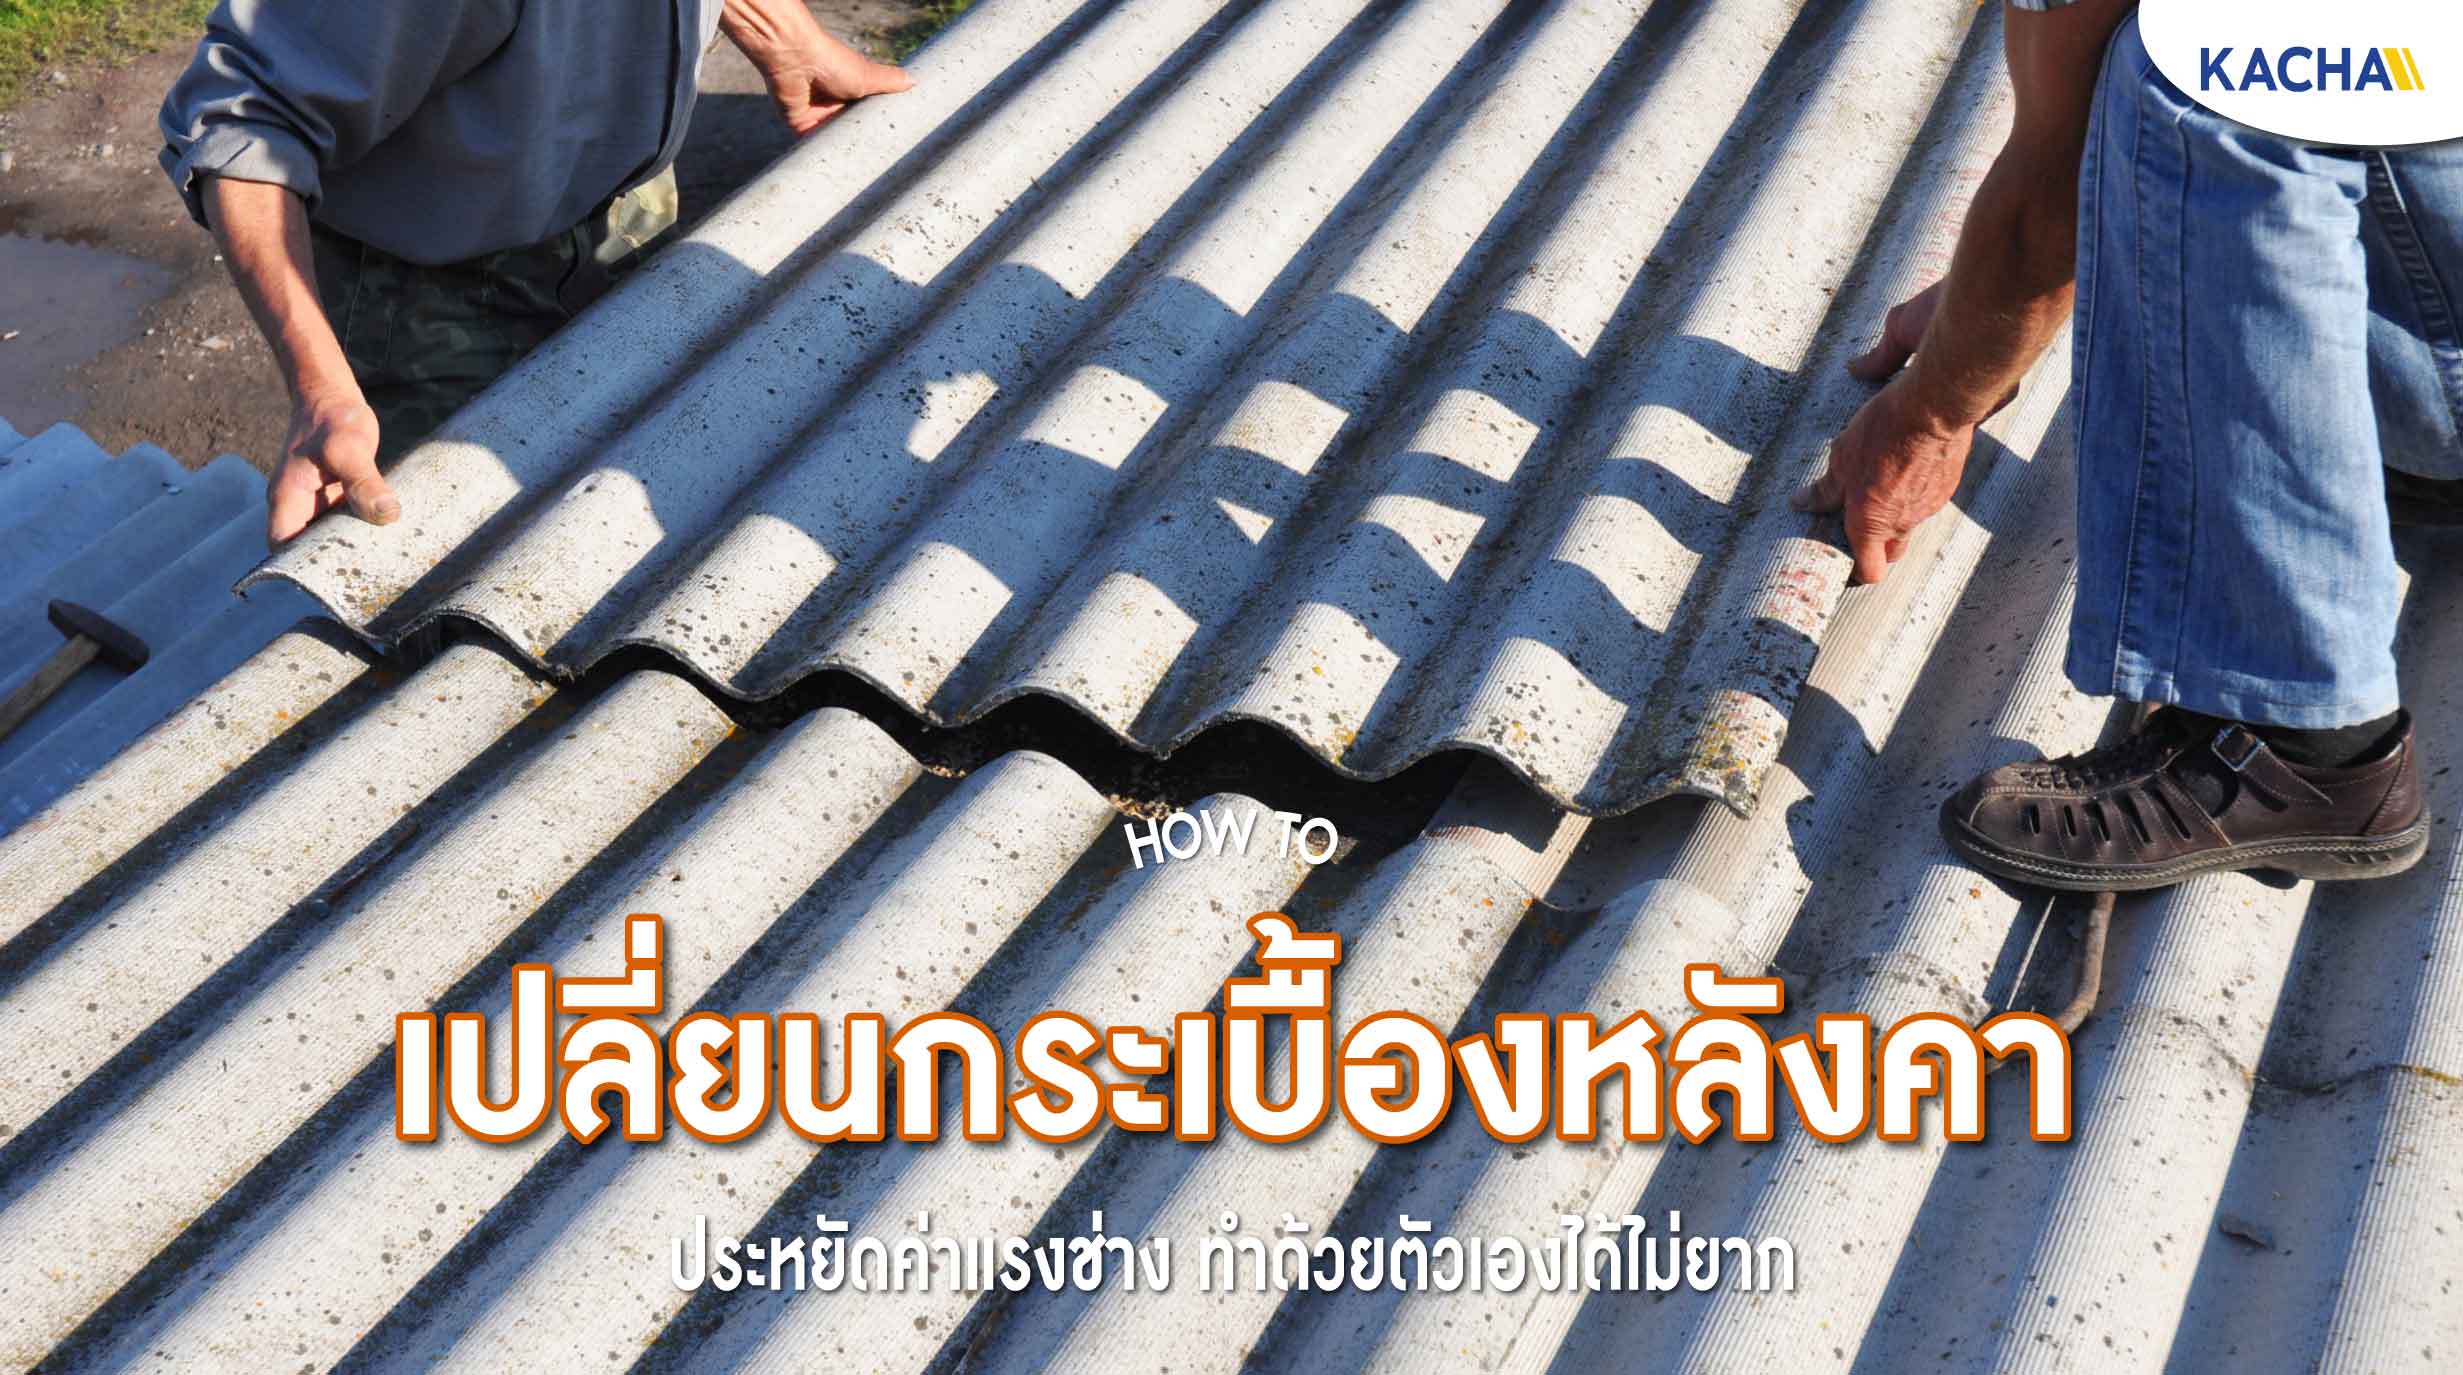 221223-Content-How-to-เปลี่ยนกระเบื้องหลังคา-01